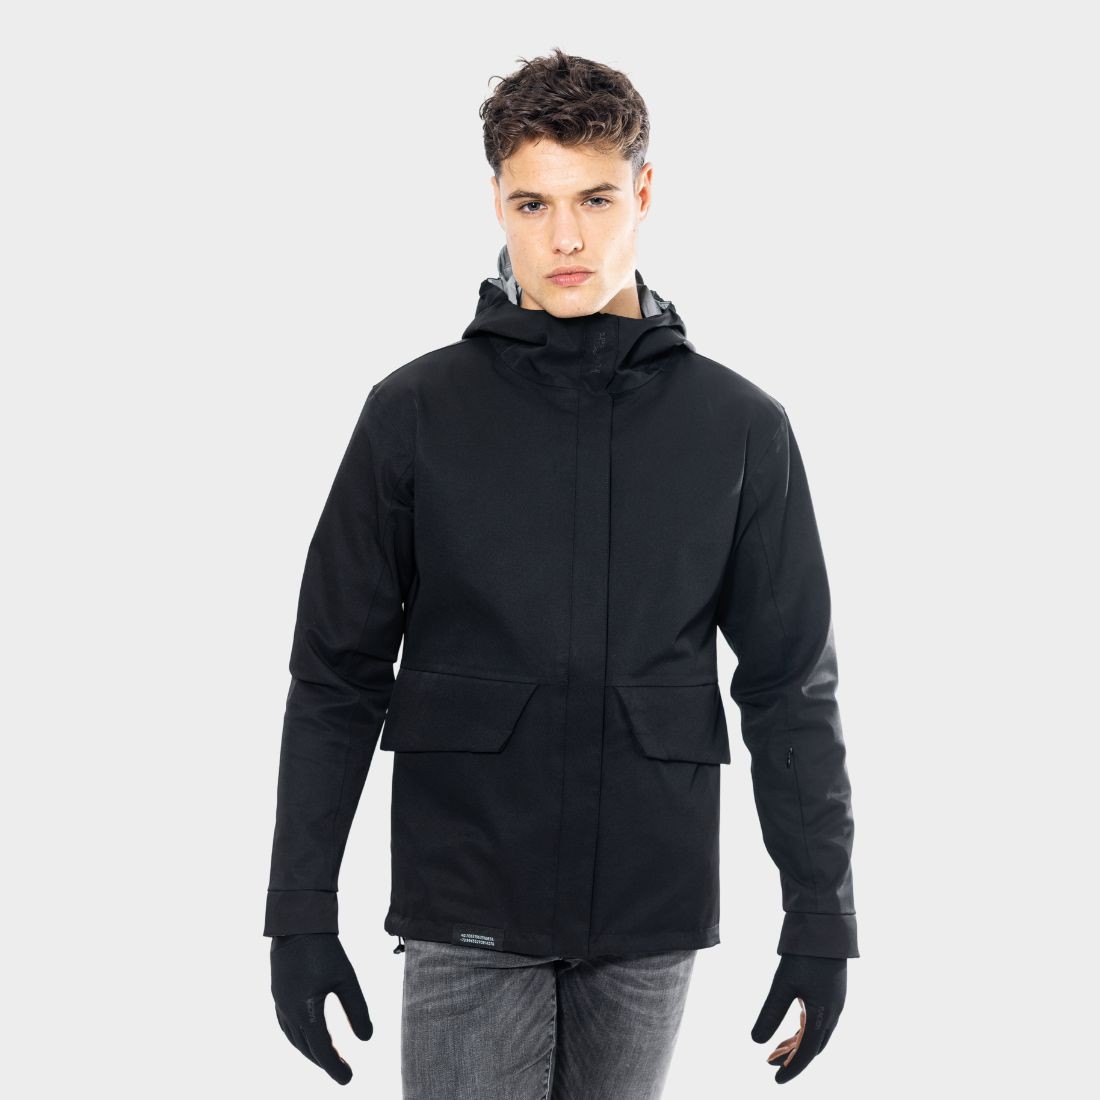 THE CITYLIGHT - 2 in 1 reflective jacket